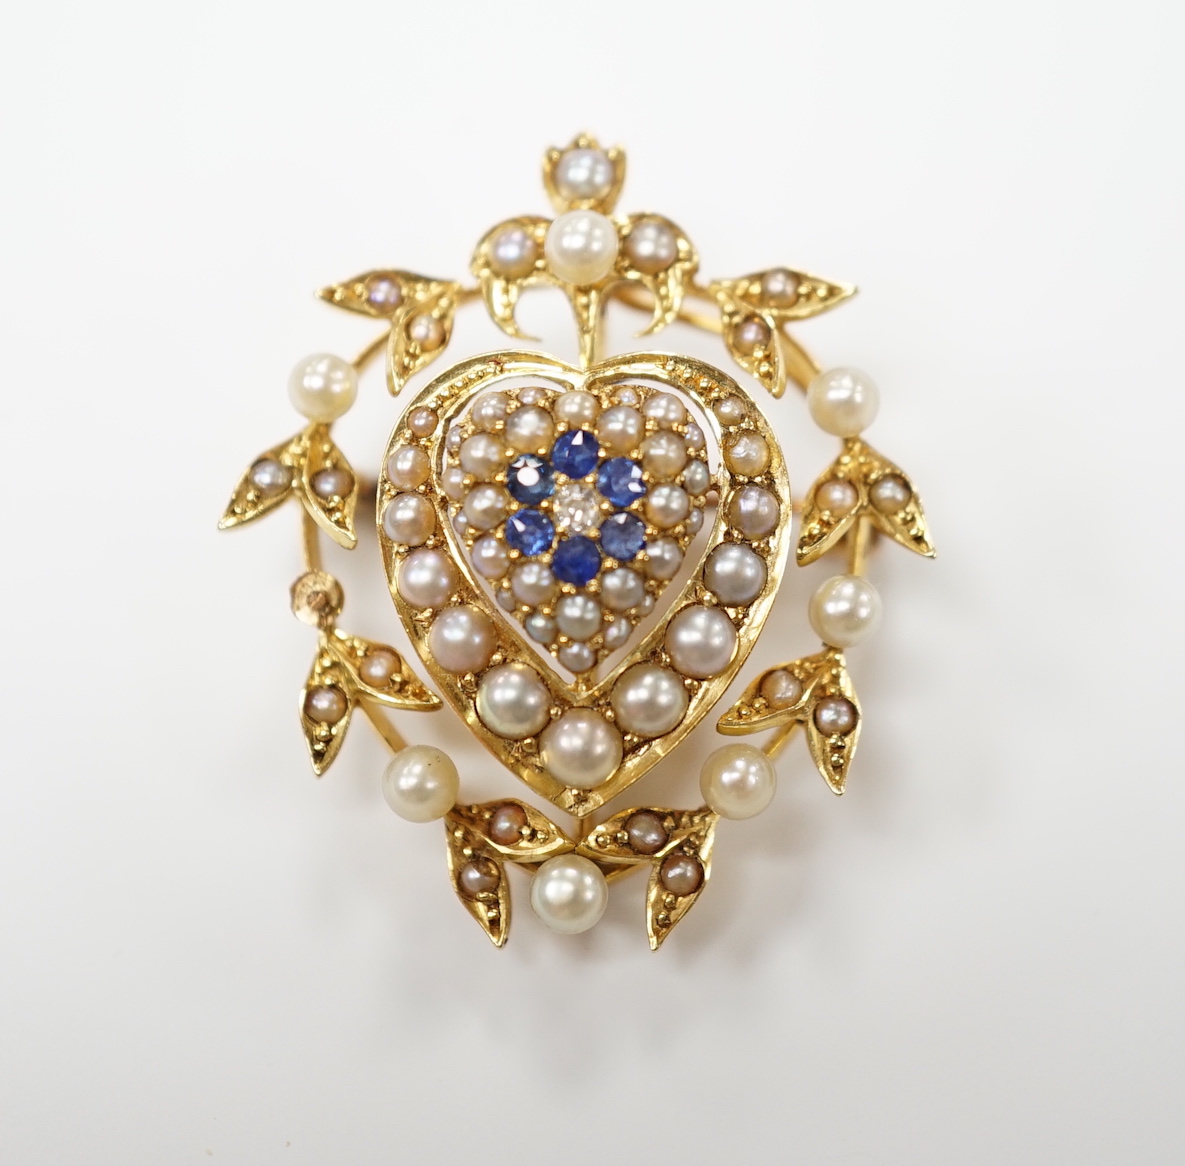 A yellow metal, sapphire, diamond and seed pearl set pendant brooch, with central heart motif, 30mm, gross weight 6.8 grams.